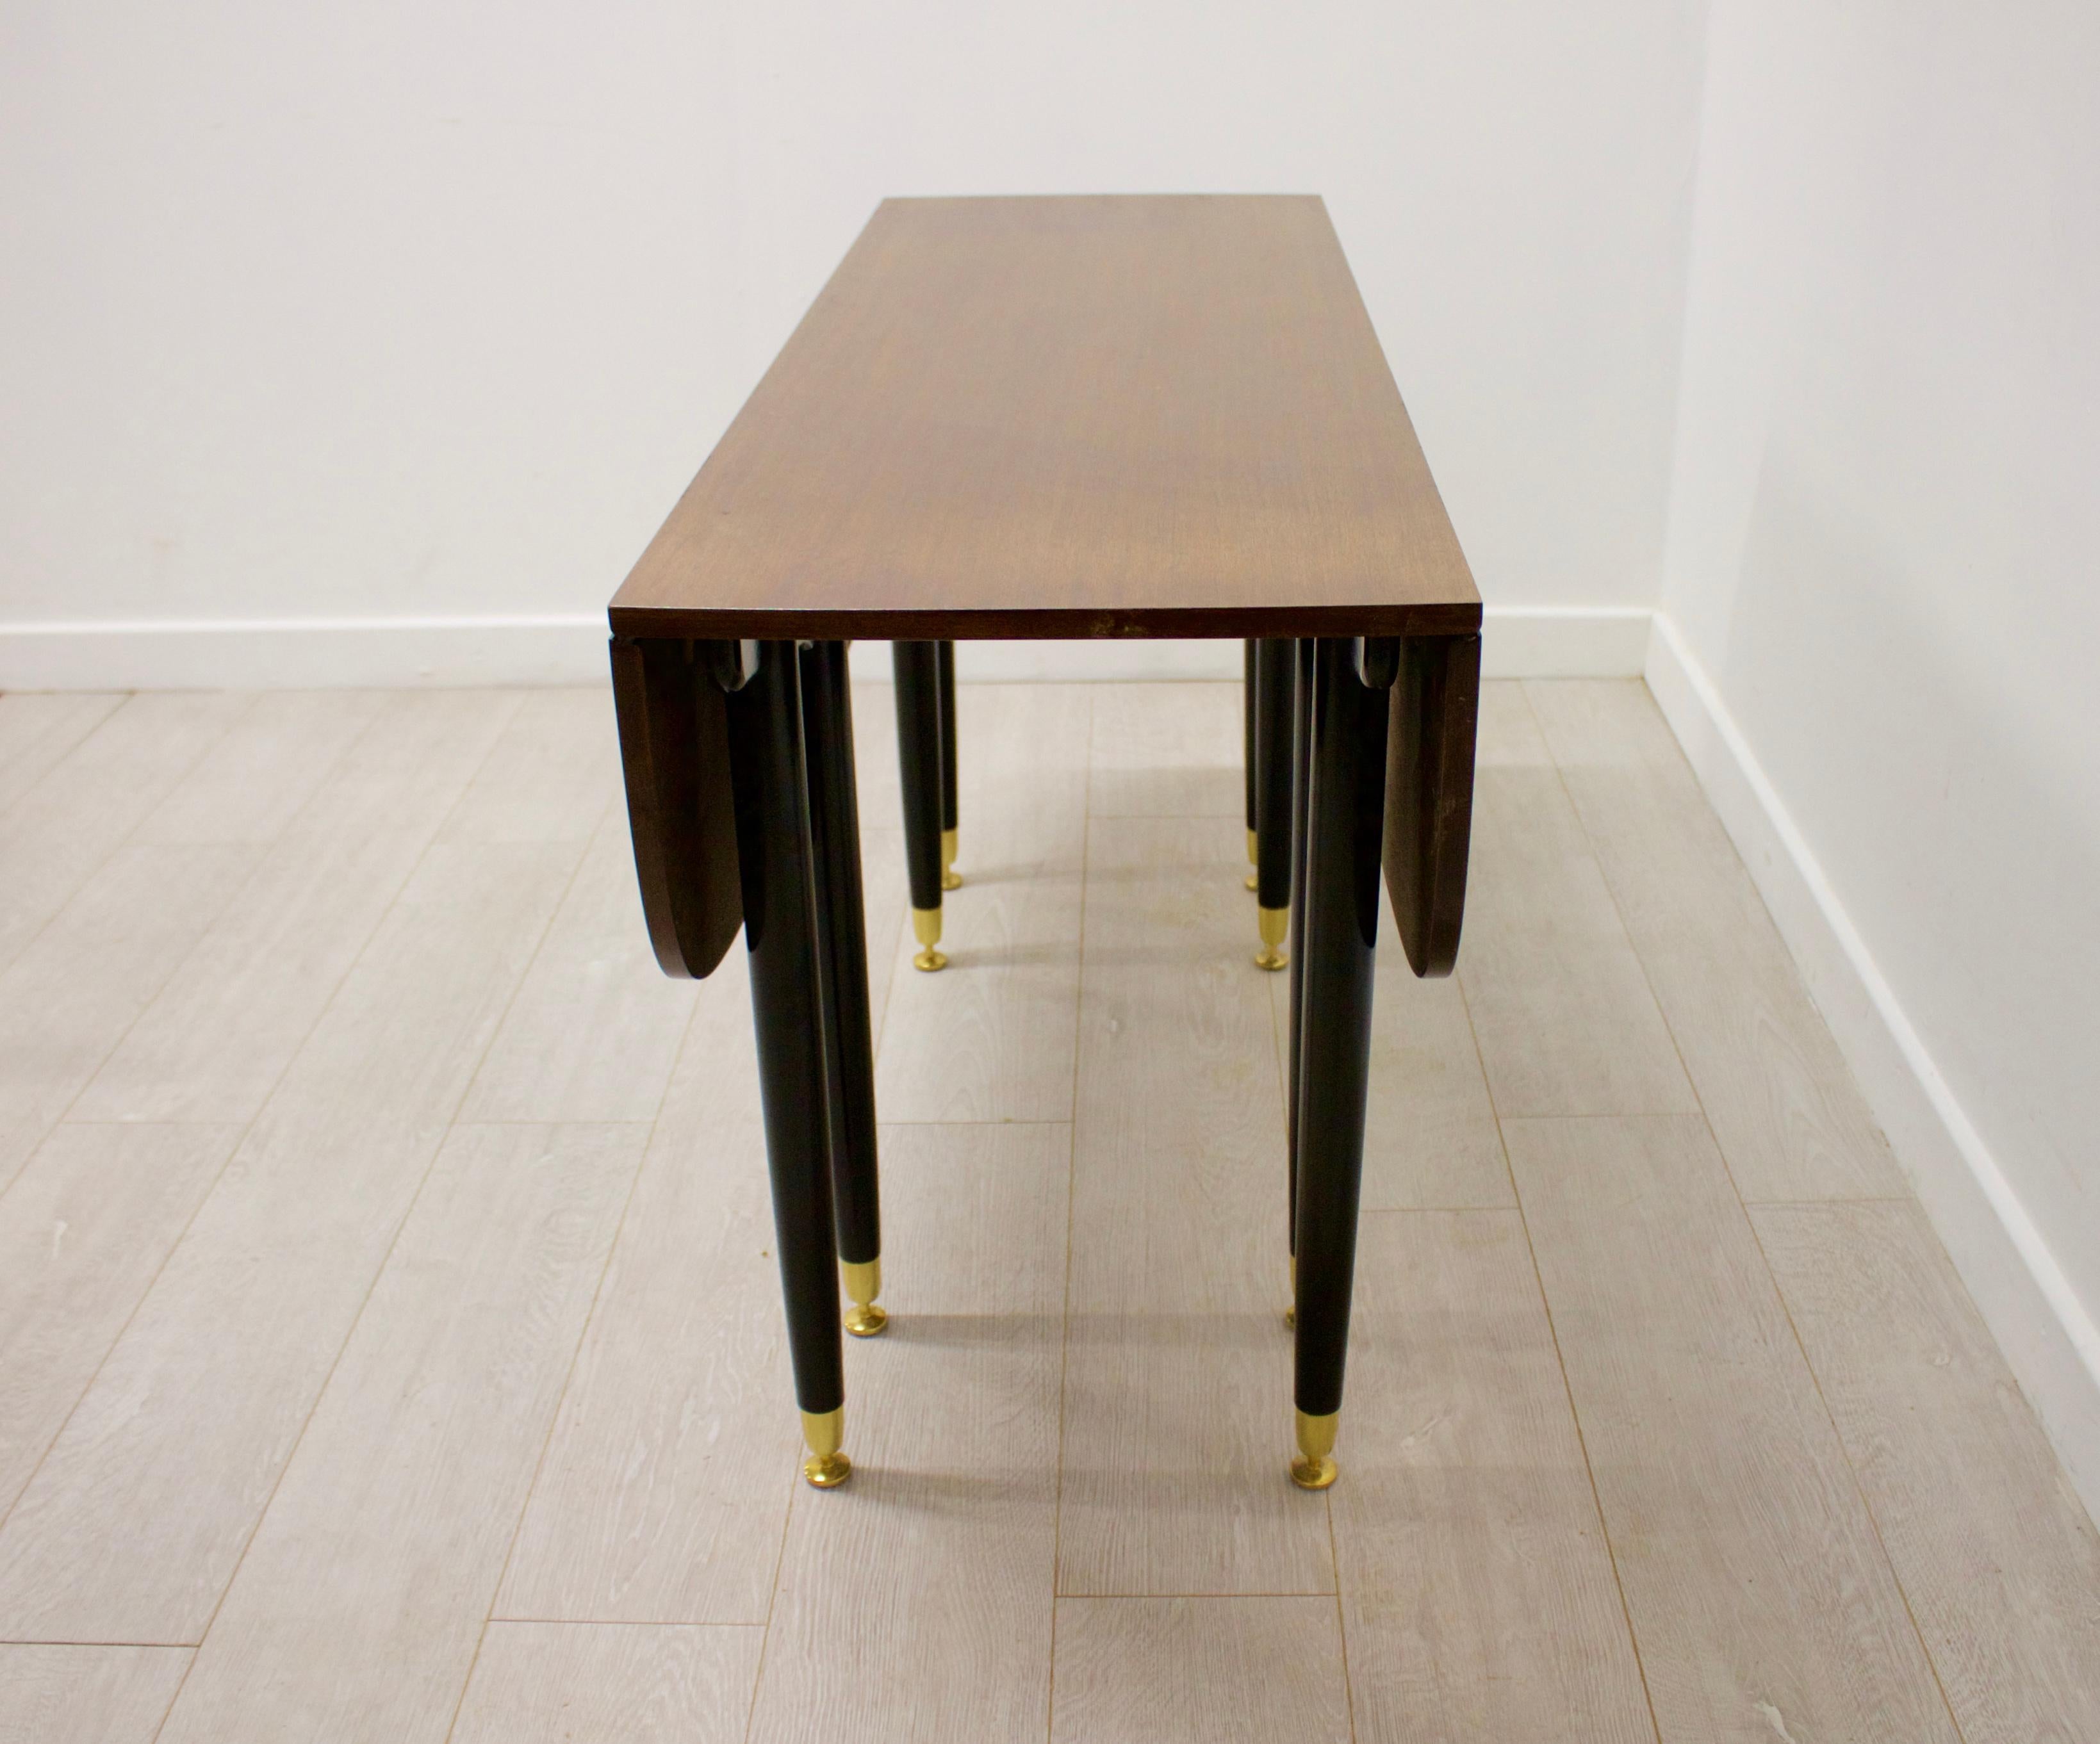 20th Century Midcentury Tola Extending Dining Table and 4 Chairs by G-Plan, 1960s